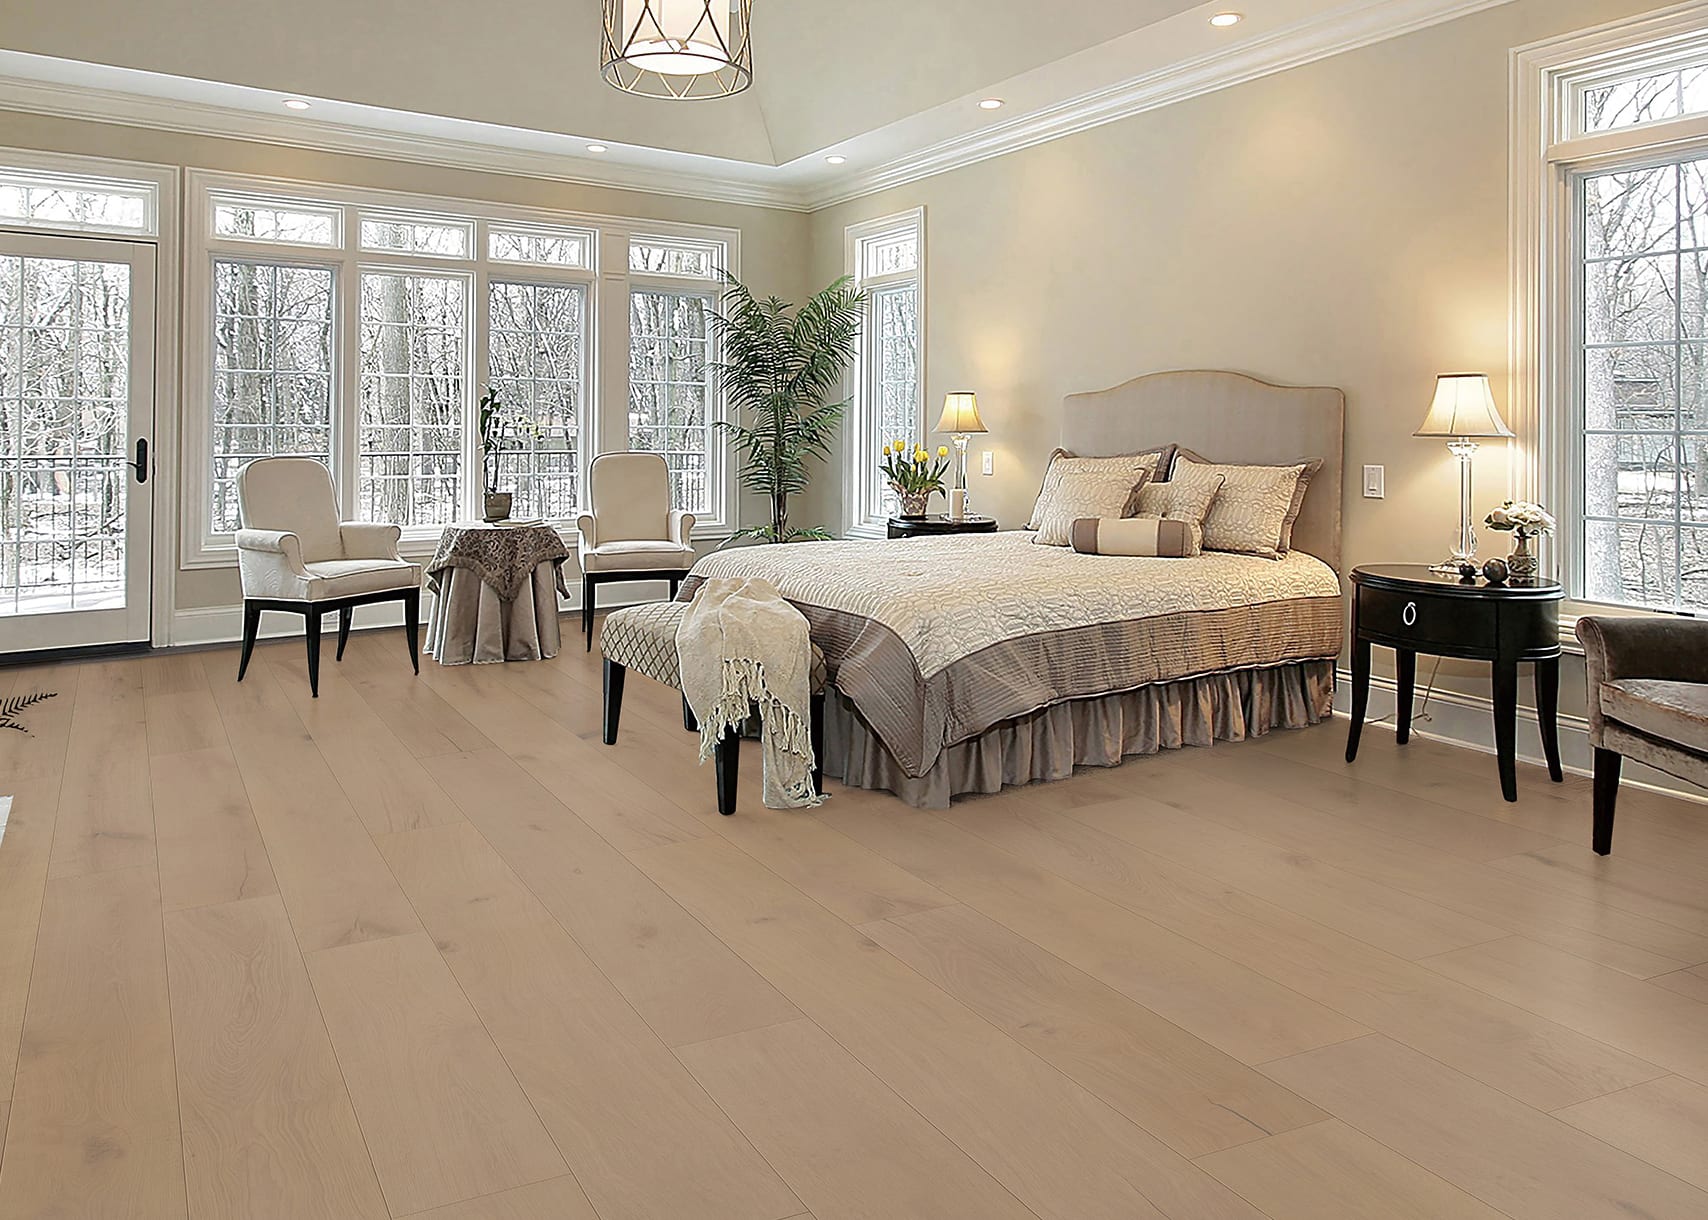 bedroom with warm white lights added and wood flooring